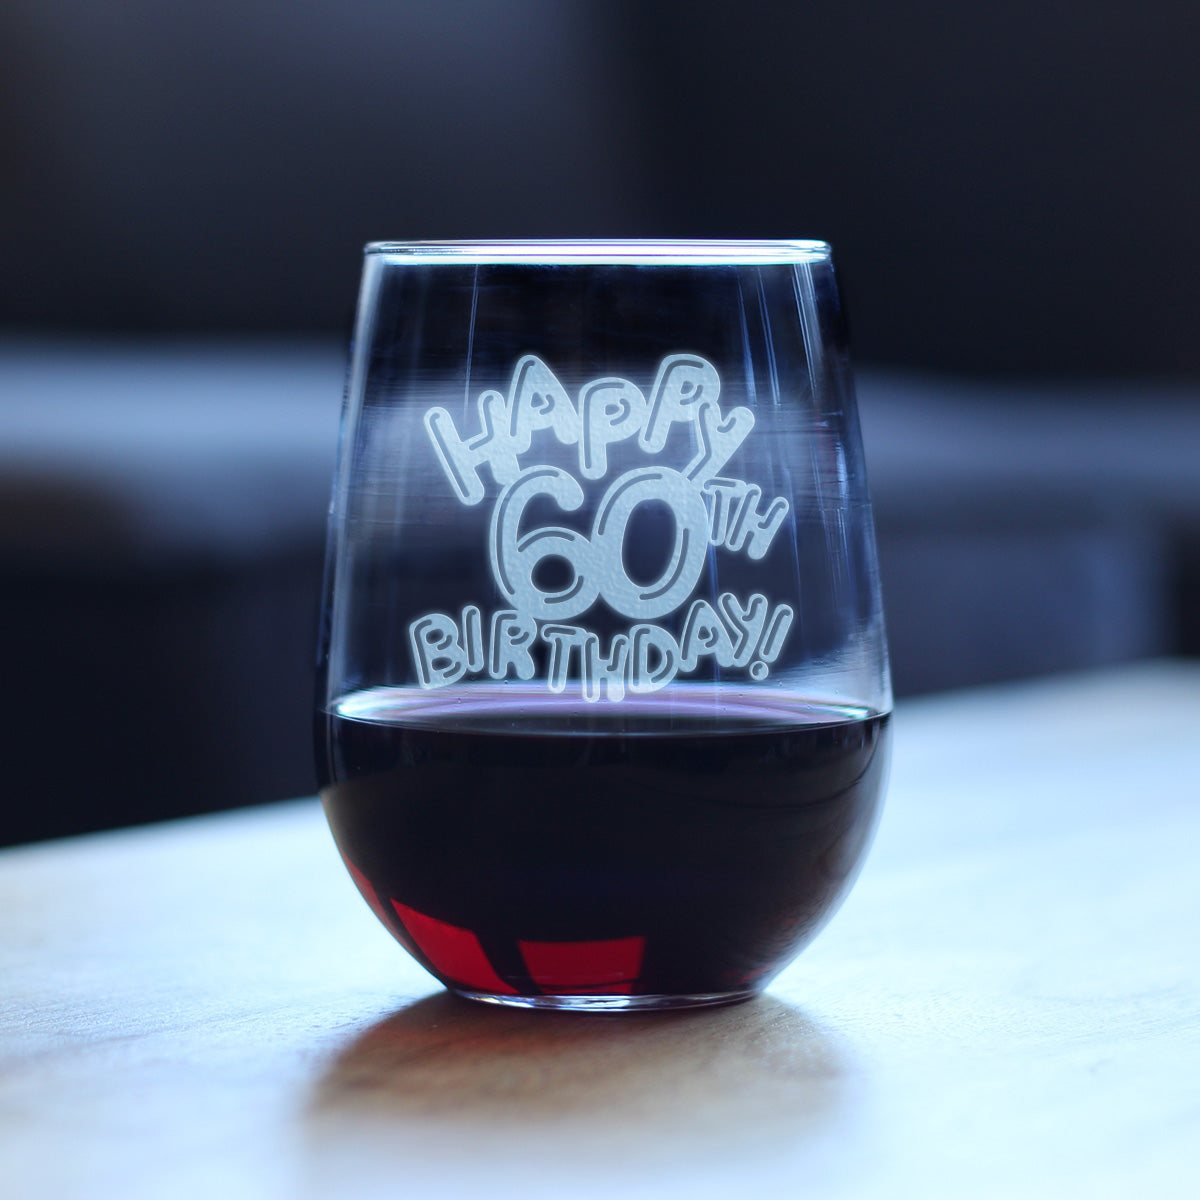 Happy 60th Birthday Balloons - Stemless Wine Glass Gifts for Women &amp; Men Turning 60 - Bday Party Decor - Large Glasses 17 Oz